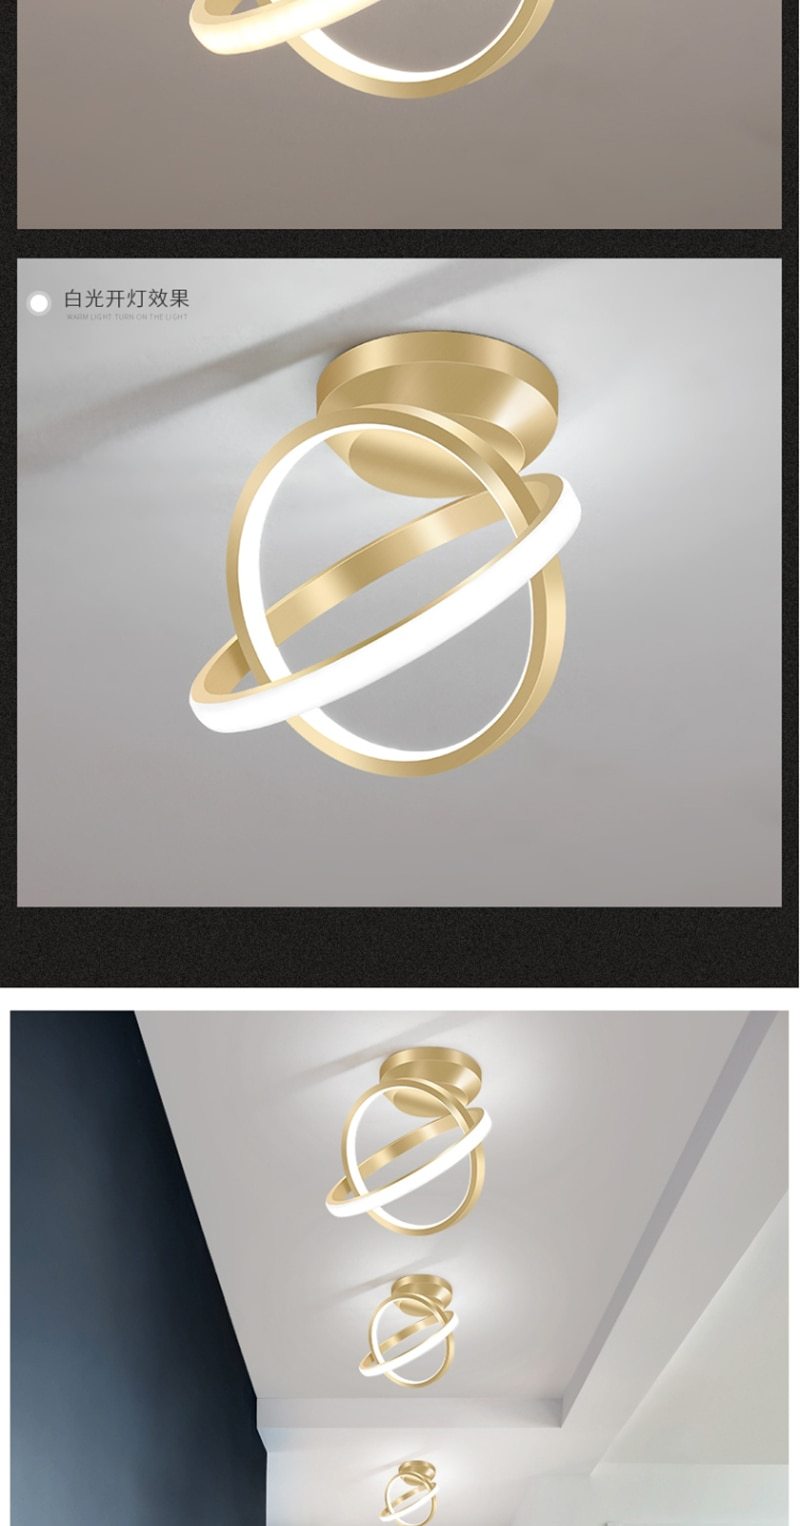 Lalit - Multi Disc Ceiling Light - Nordic Side - 05-21, feed-cl1-lights-over-80-dollars